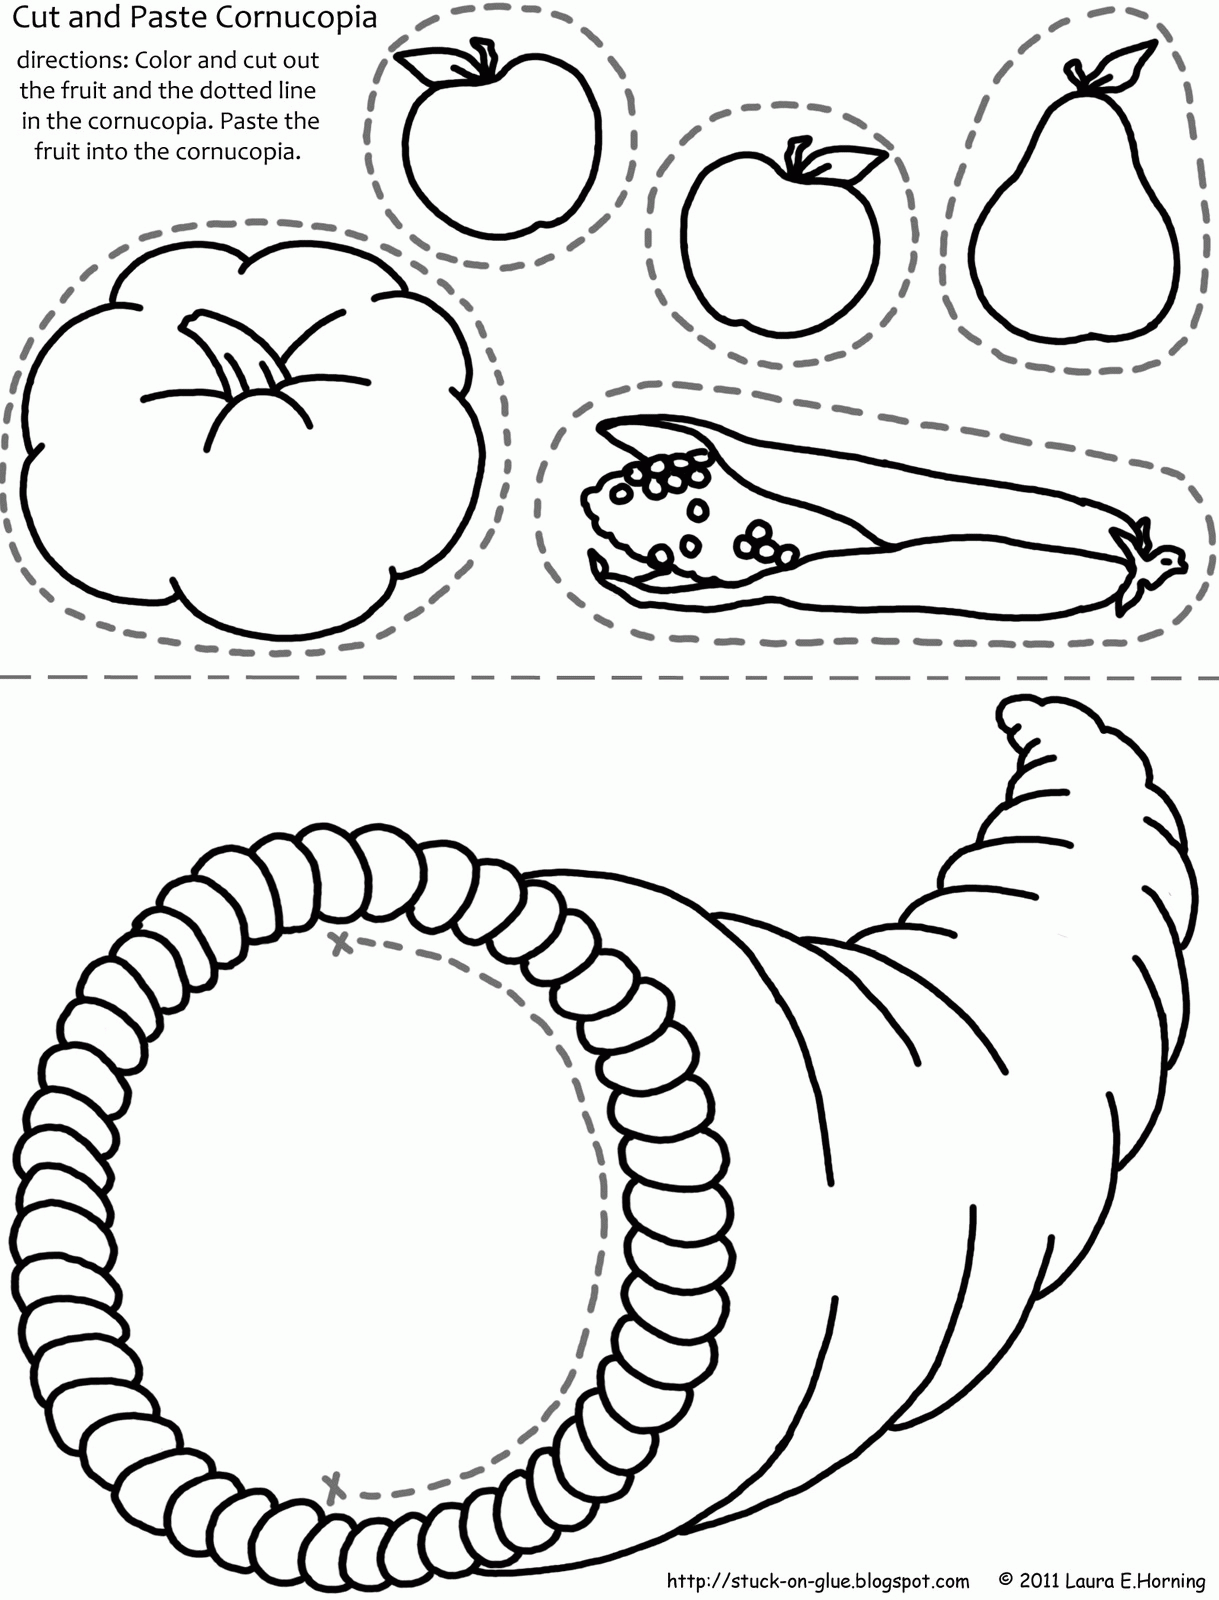 Cornucopia Printable Coloring Pages | Free Coloring Pages